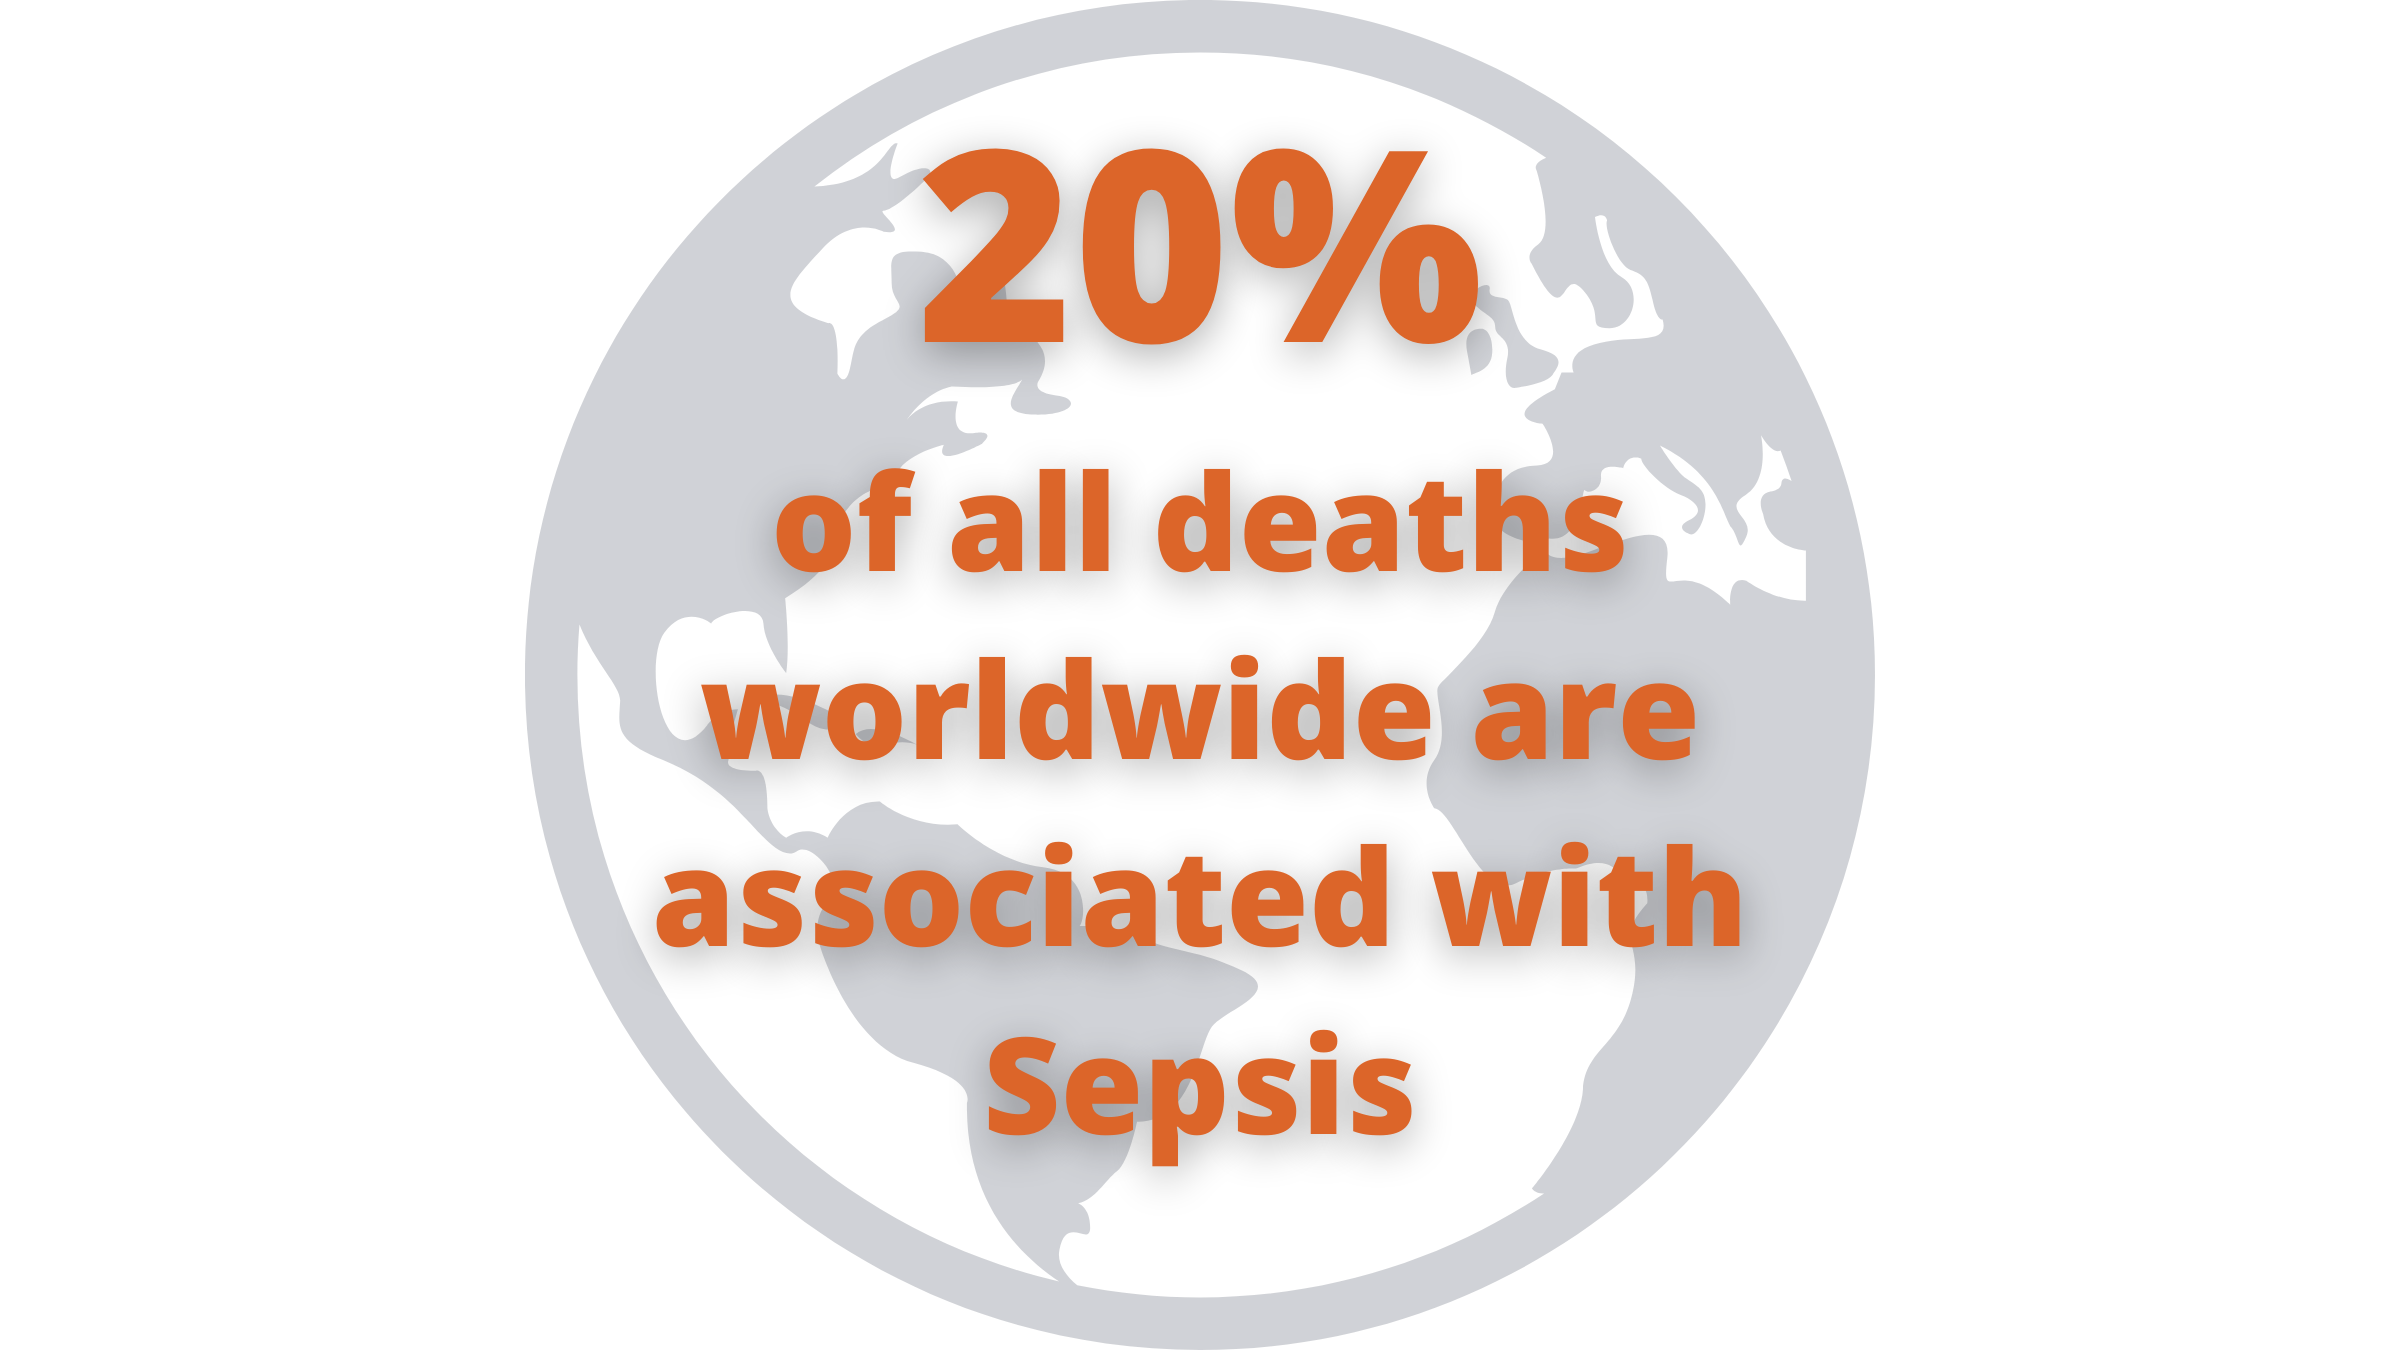 20% of all deaths worldwide are associated with Sepsis.